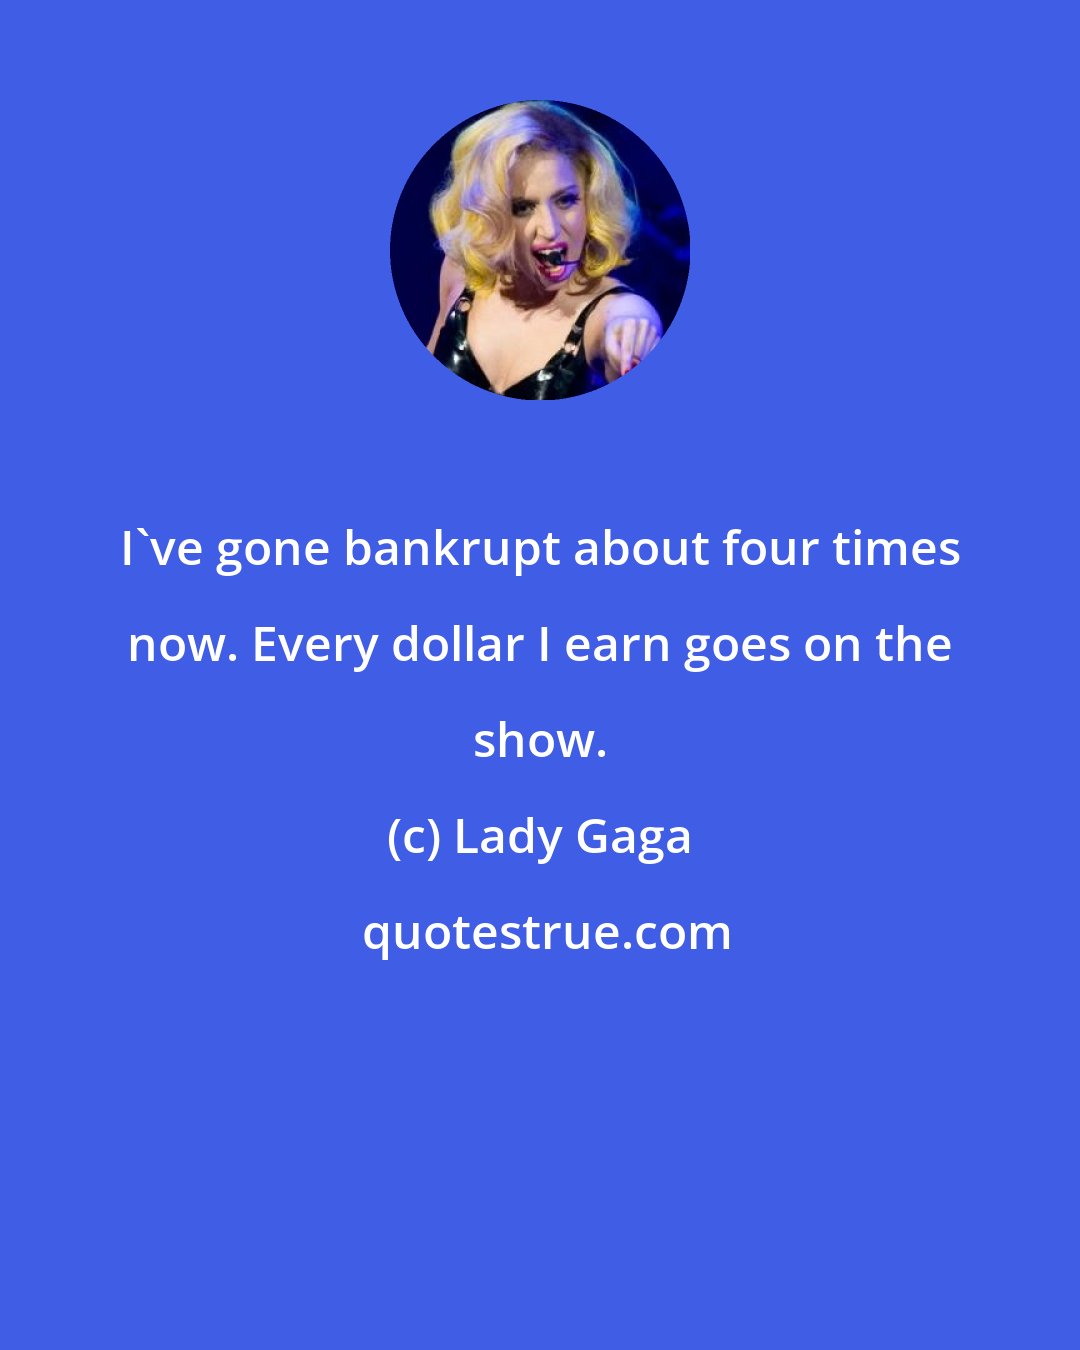 Lady Gaga: I've gone bankrupt about four times now. Every dollar I earn goes on the show.